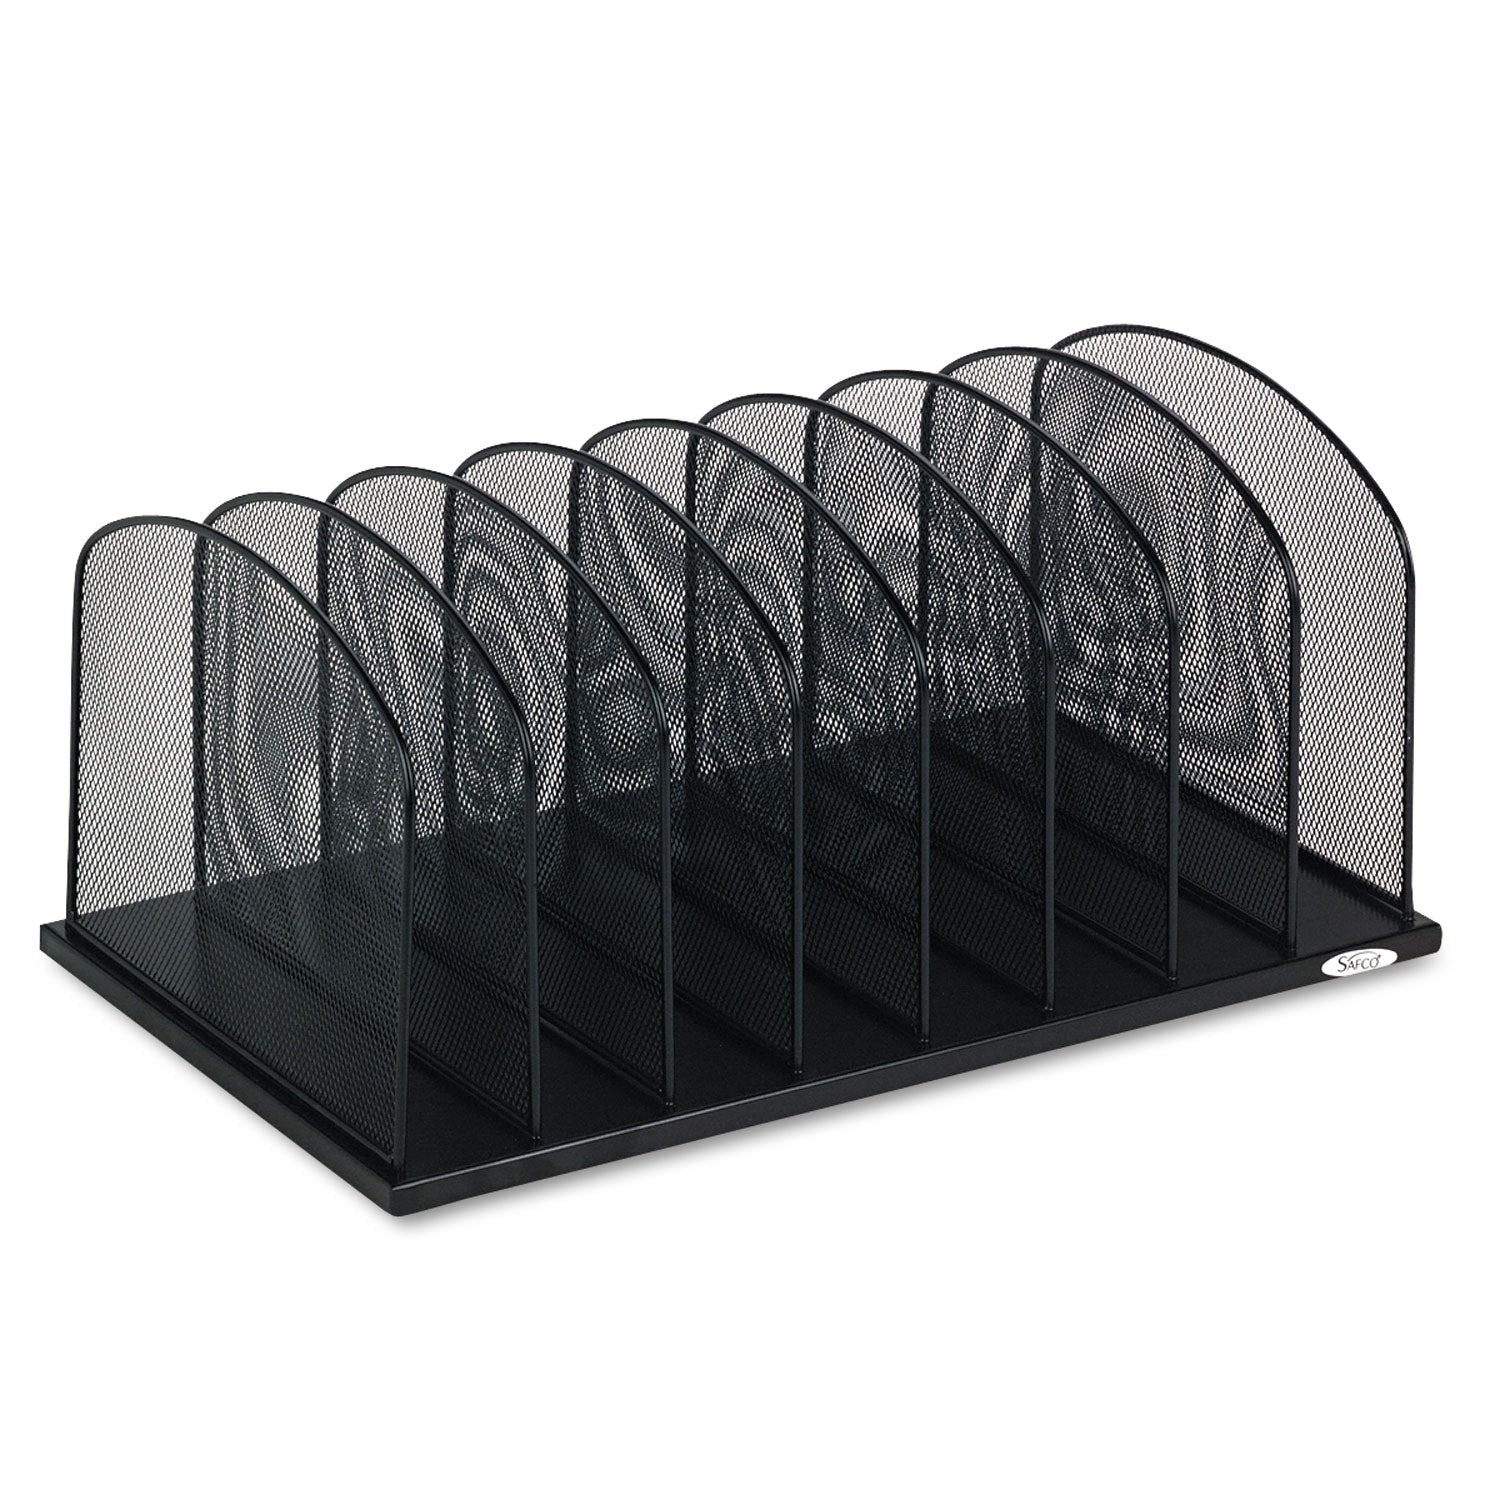 Onyx Mesh Desk Organizer with Upright Sections, 8 Sections, Letter to Legal Size Files, 19.5" x 11.5" x 8.25", Black - 